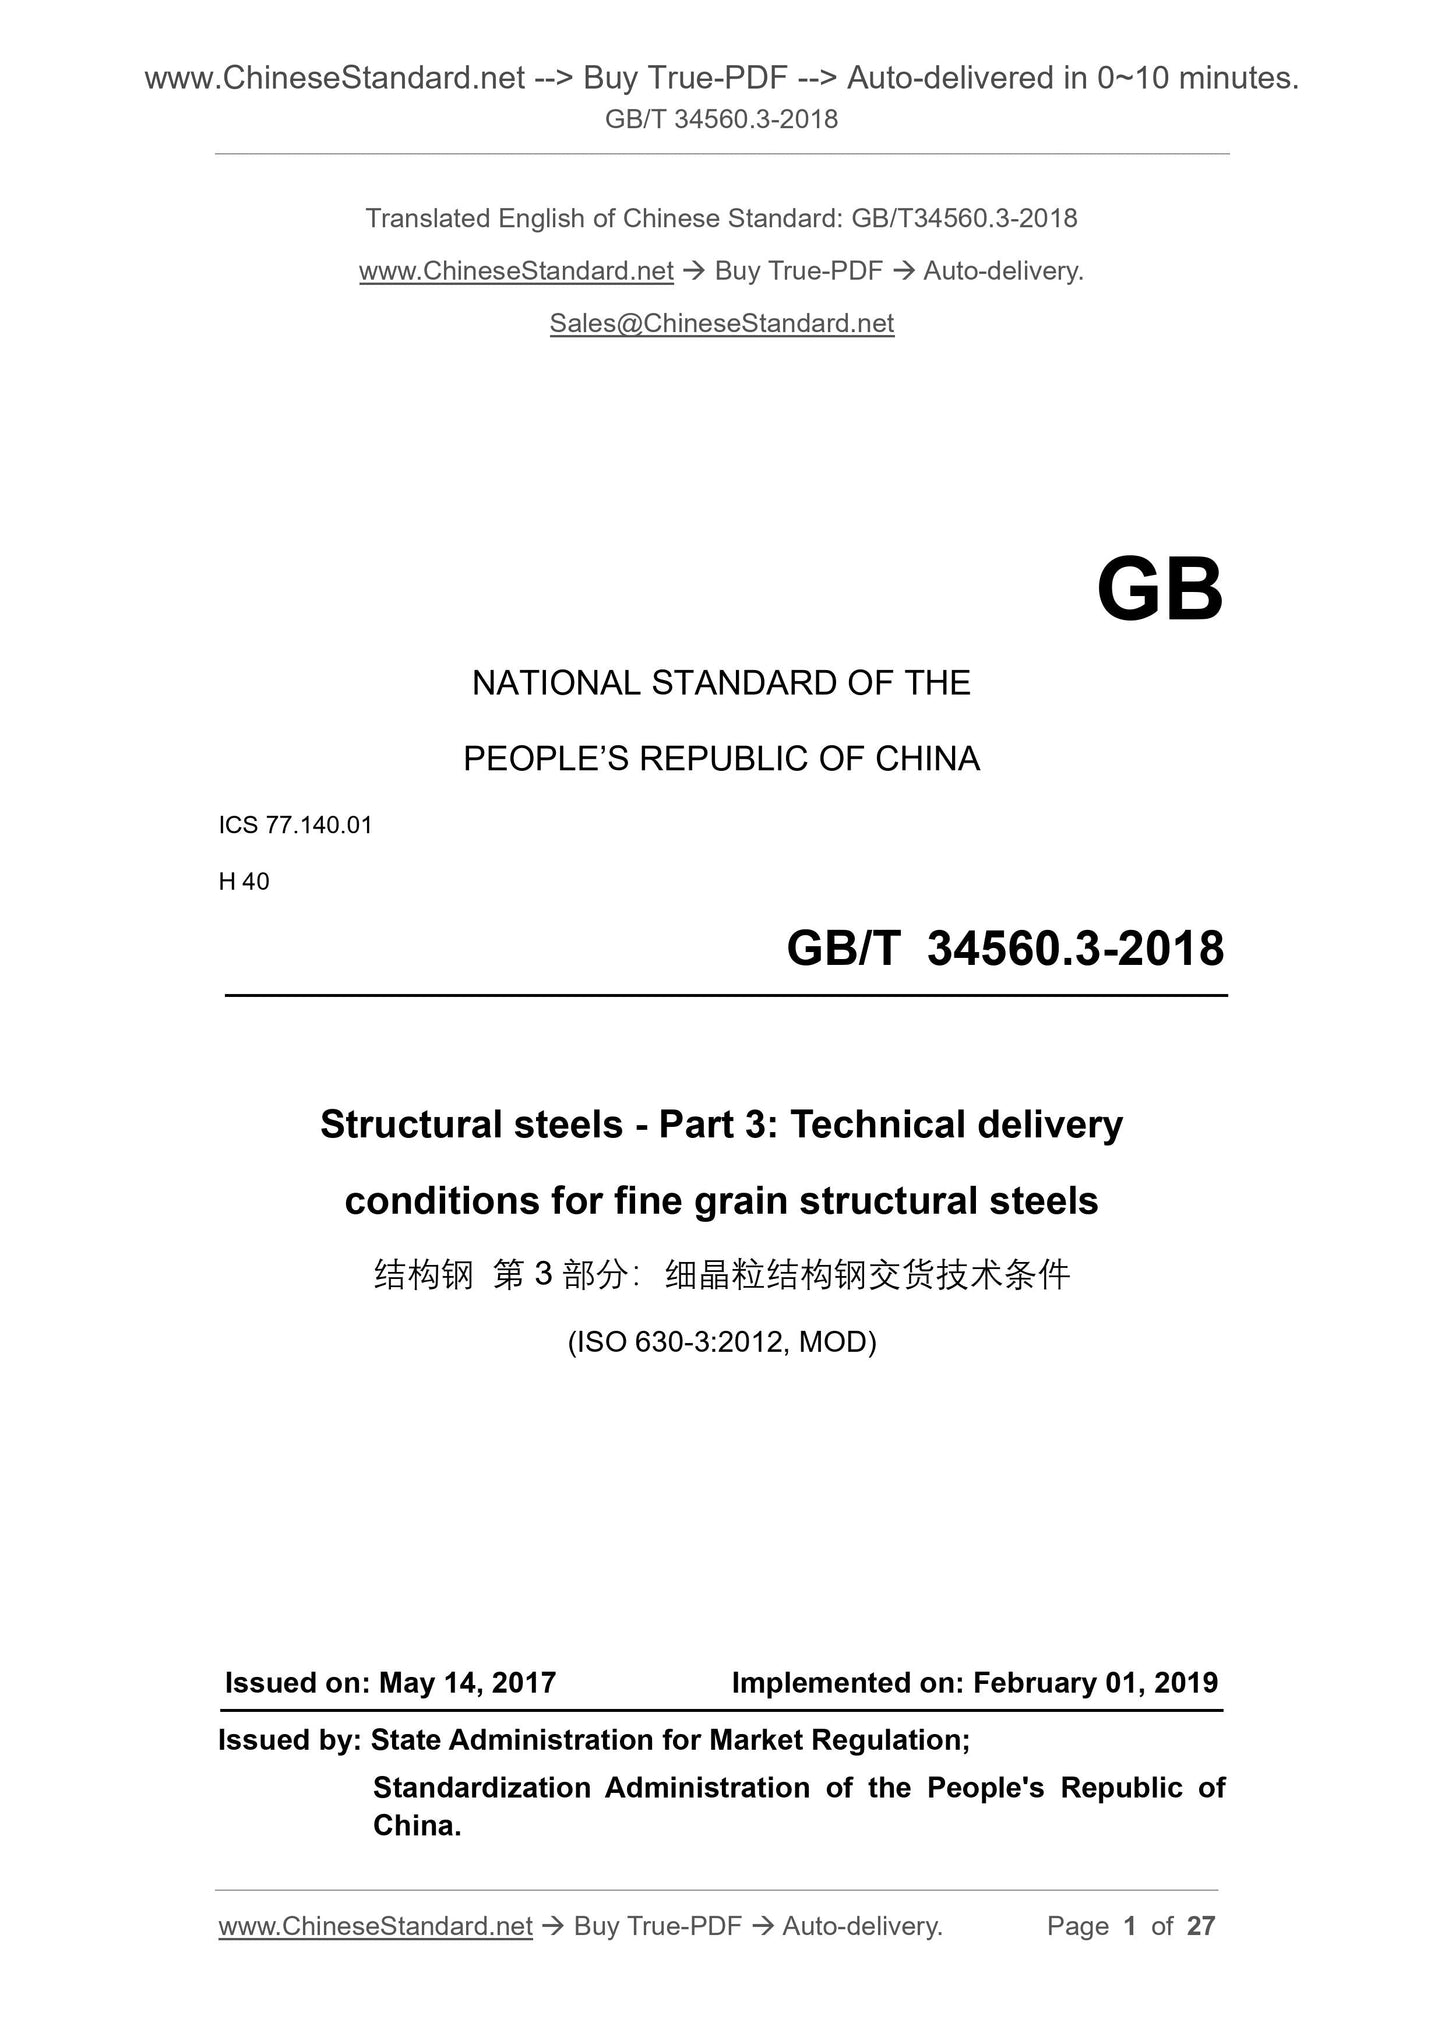 GB/T 34560.3-2018 Page 1